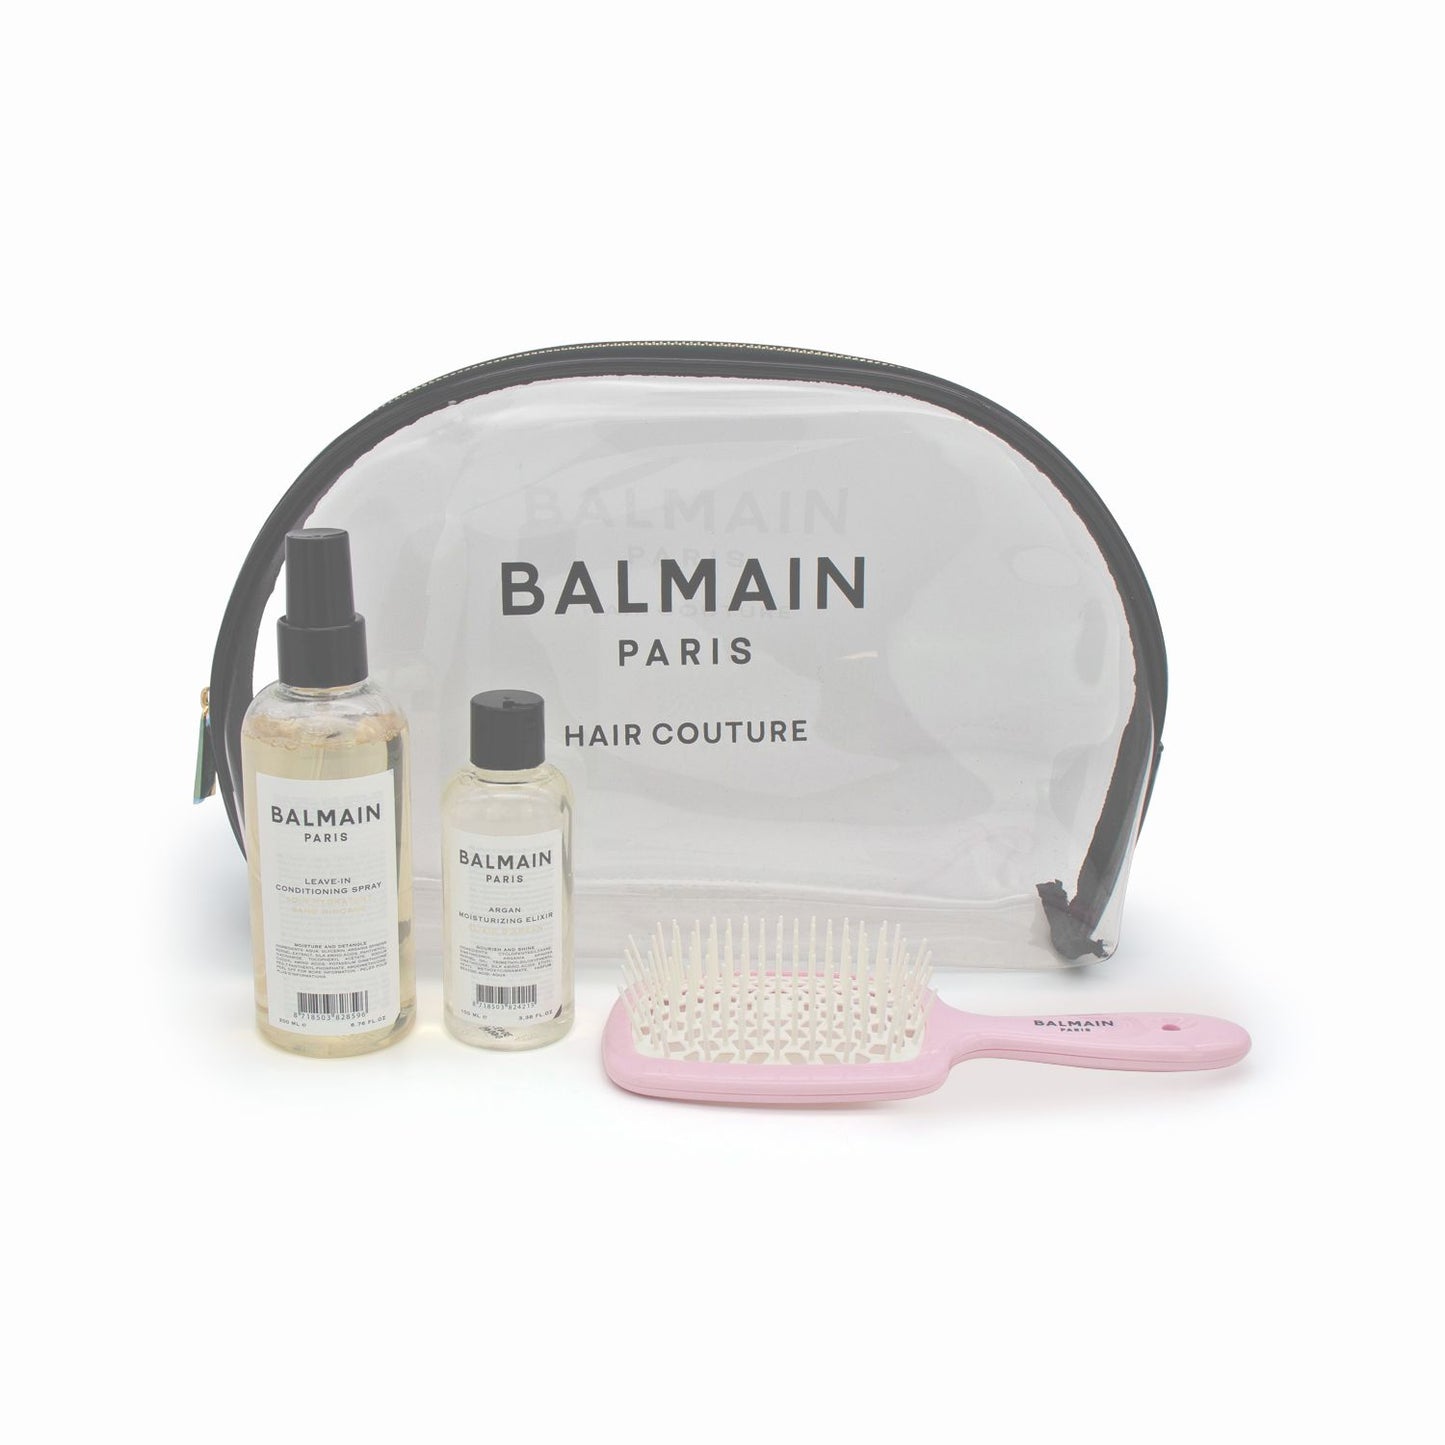 Balmain Limited Edition Gift Set with Conditioner Elixir & Brush - Imperfect Box